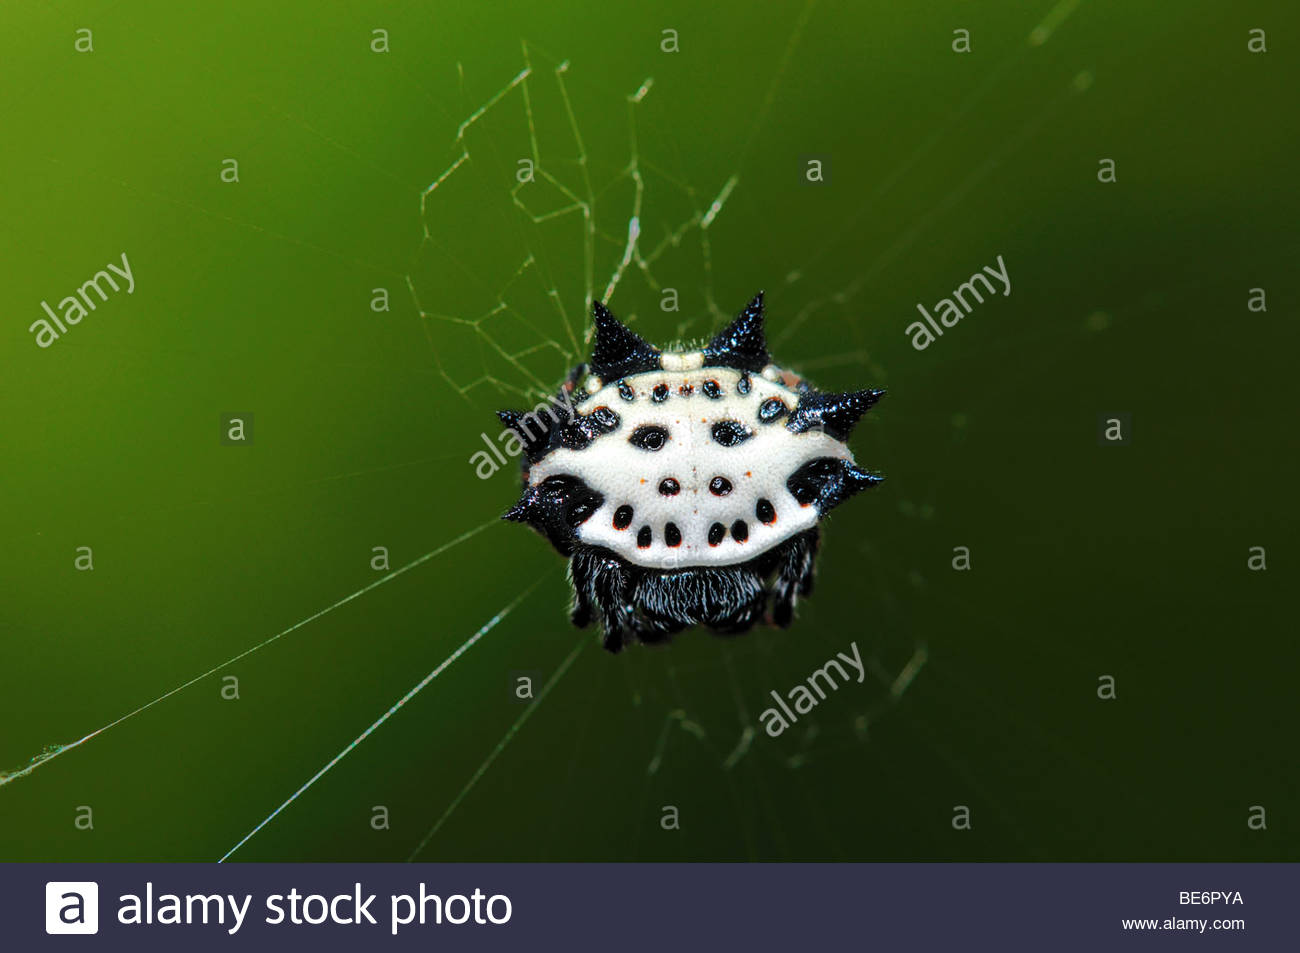 Spiny Orb Weaver svg #12, Download drawings